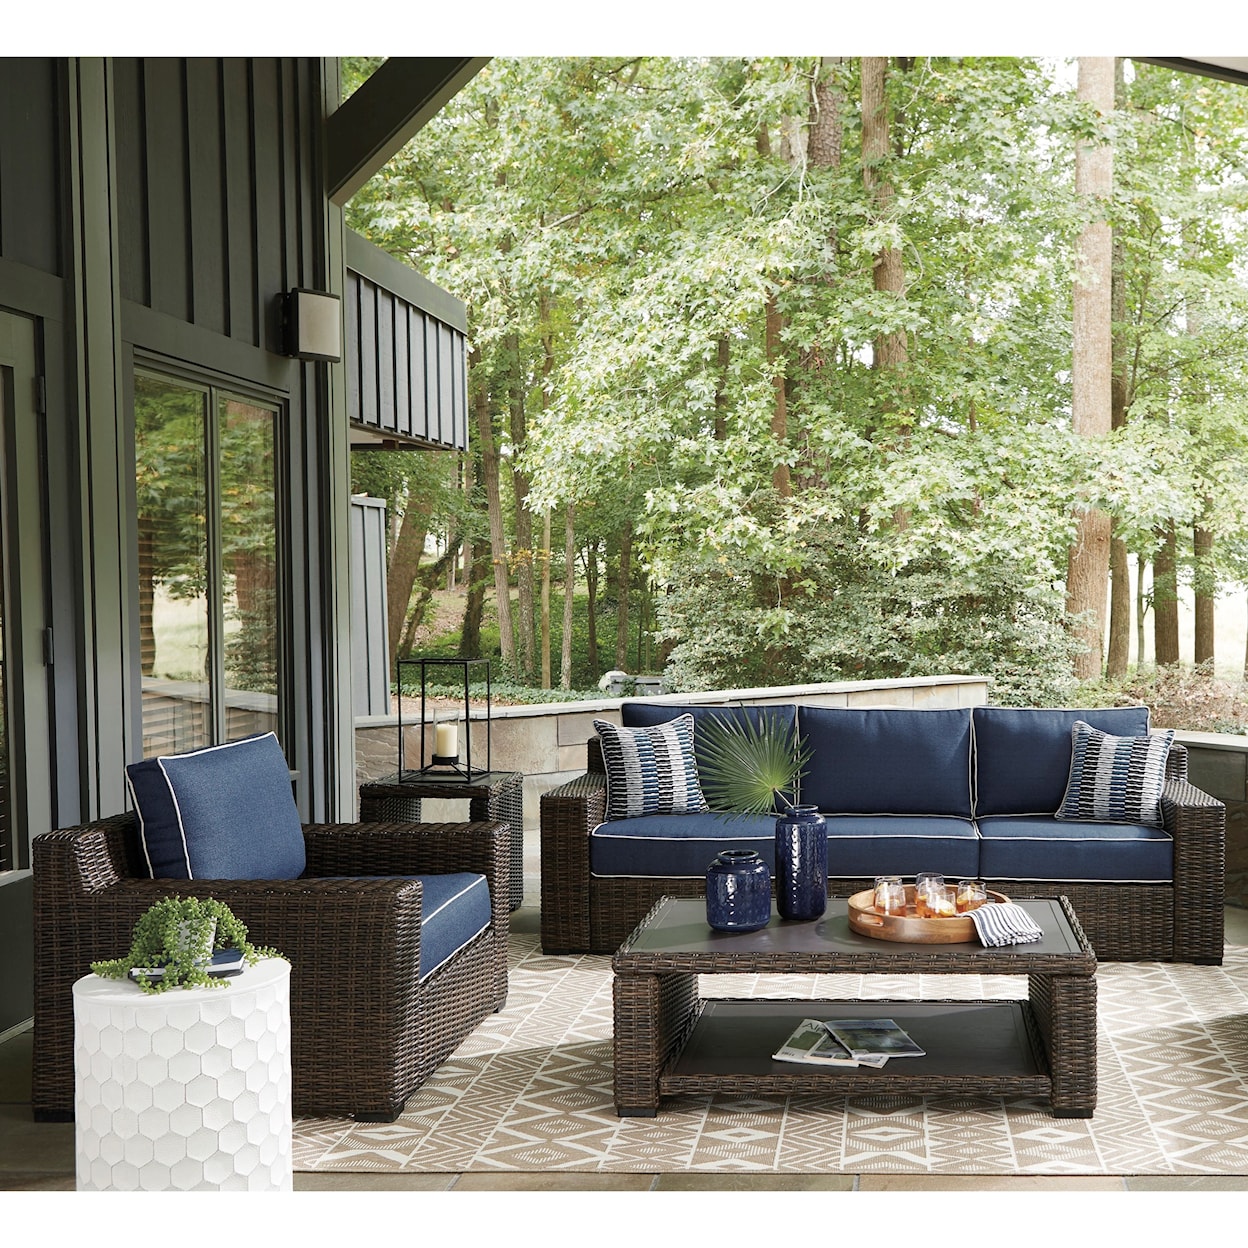 Signature Grasson Lane 5 Pc. Outdoor Seating Group